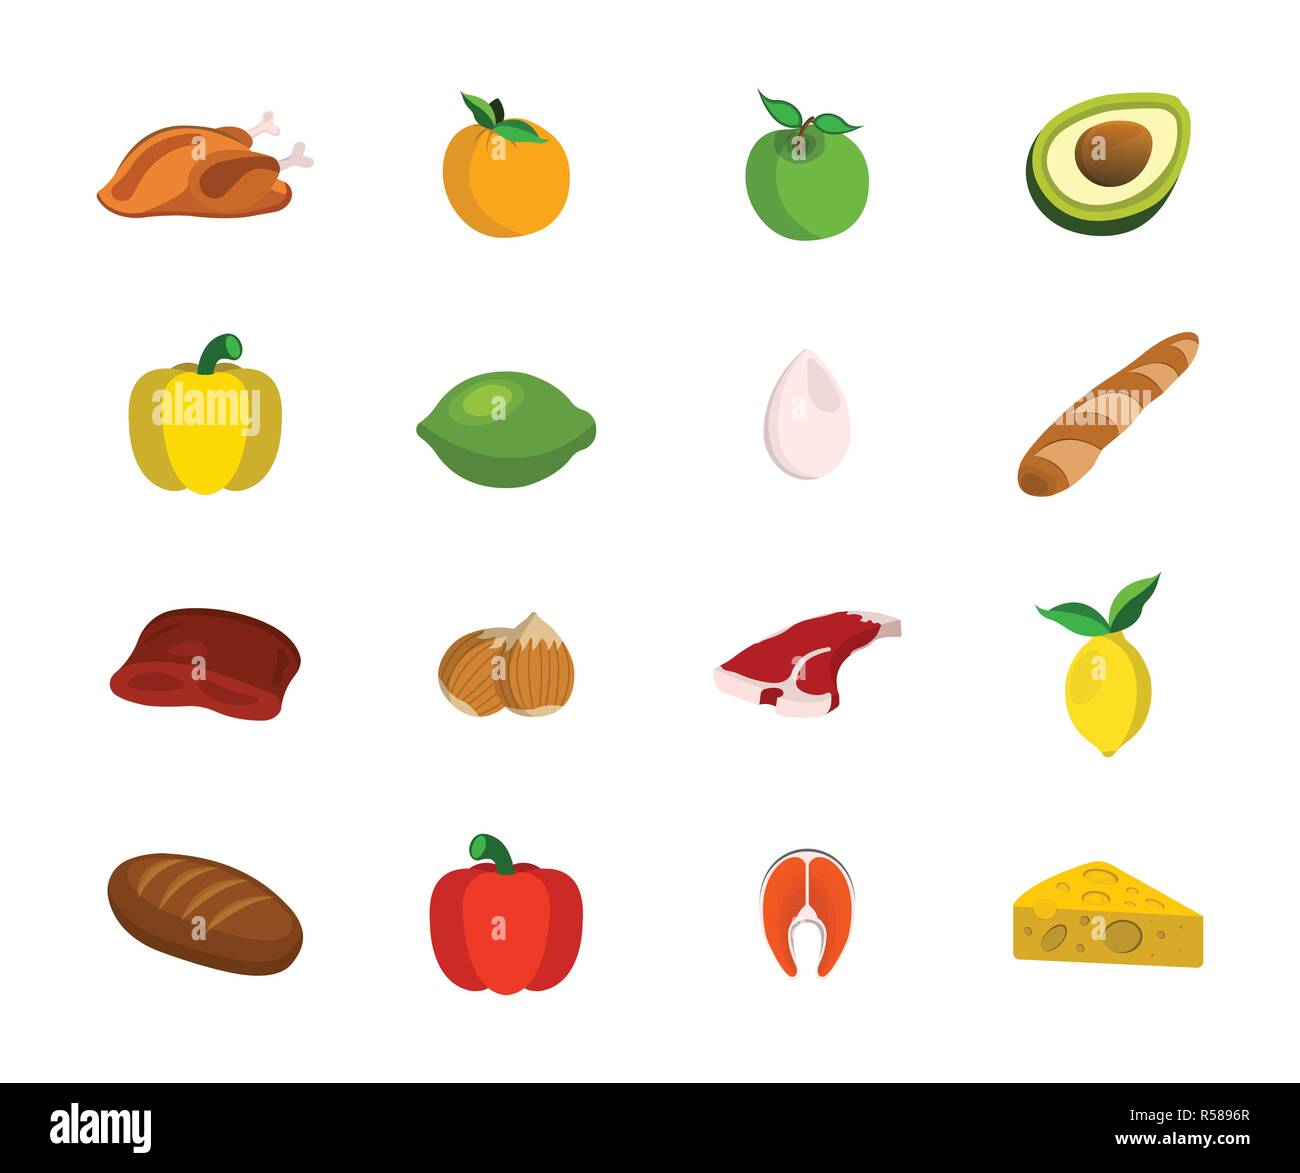 Cartoon Fruits and Vegetables,vector Stock Vector - Illustration